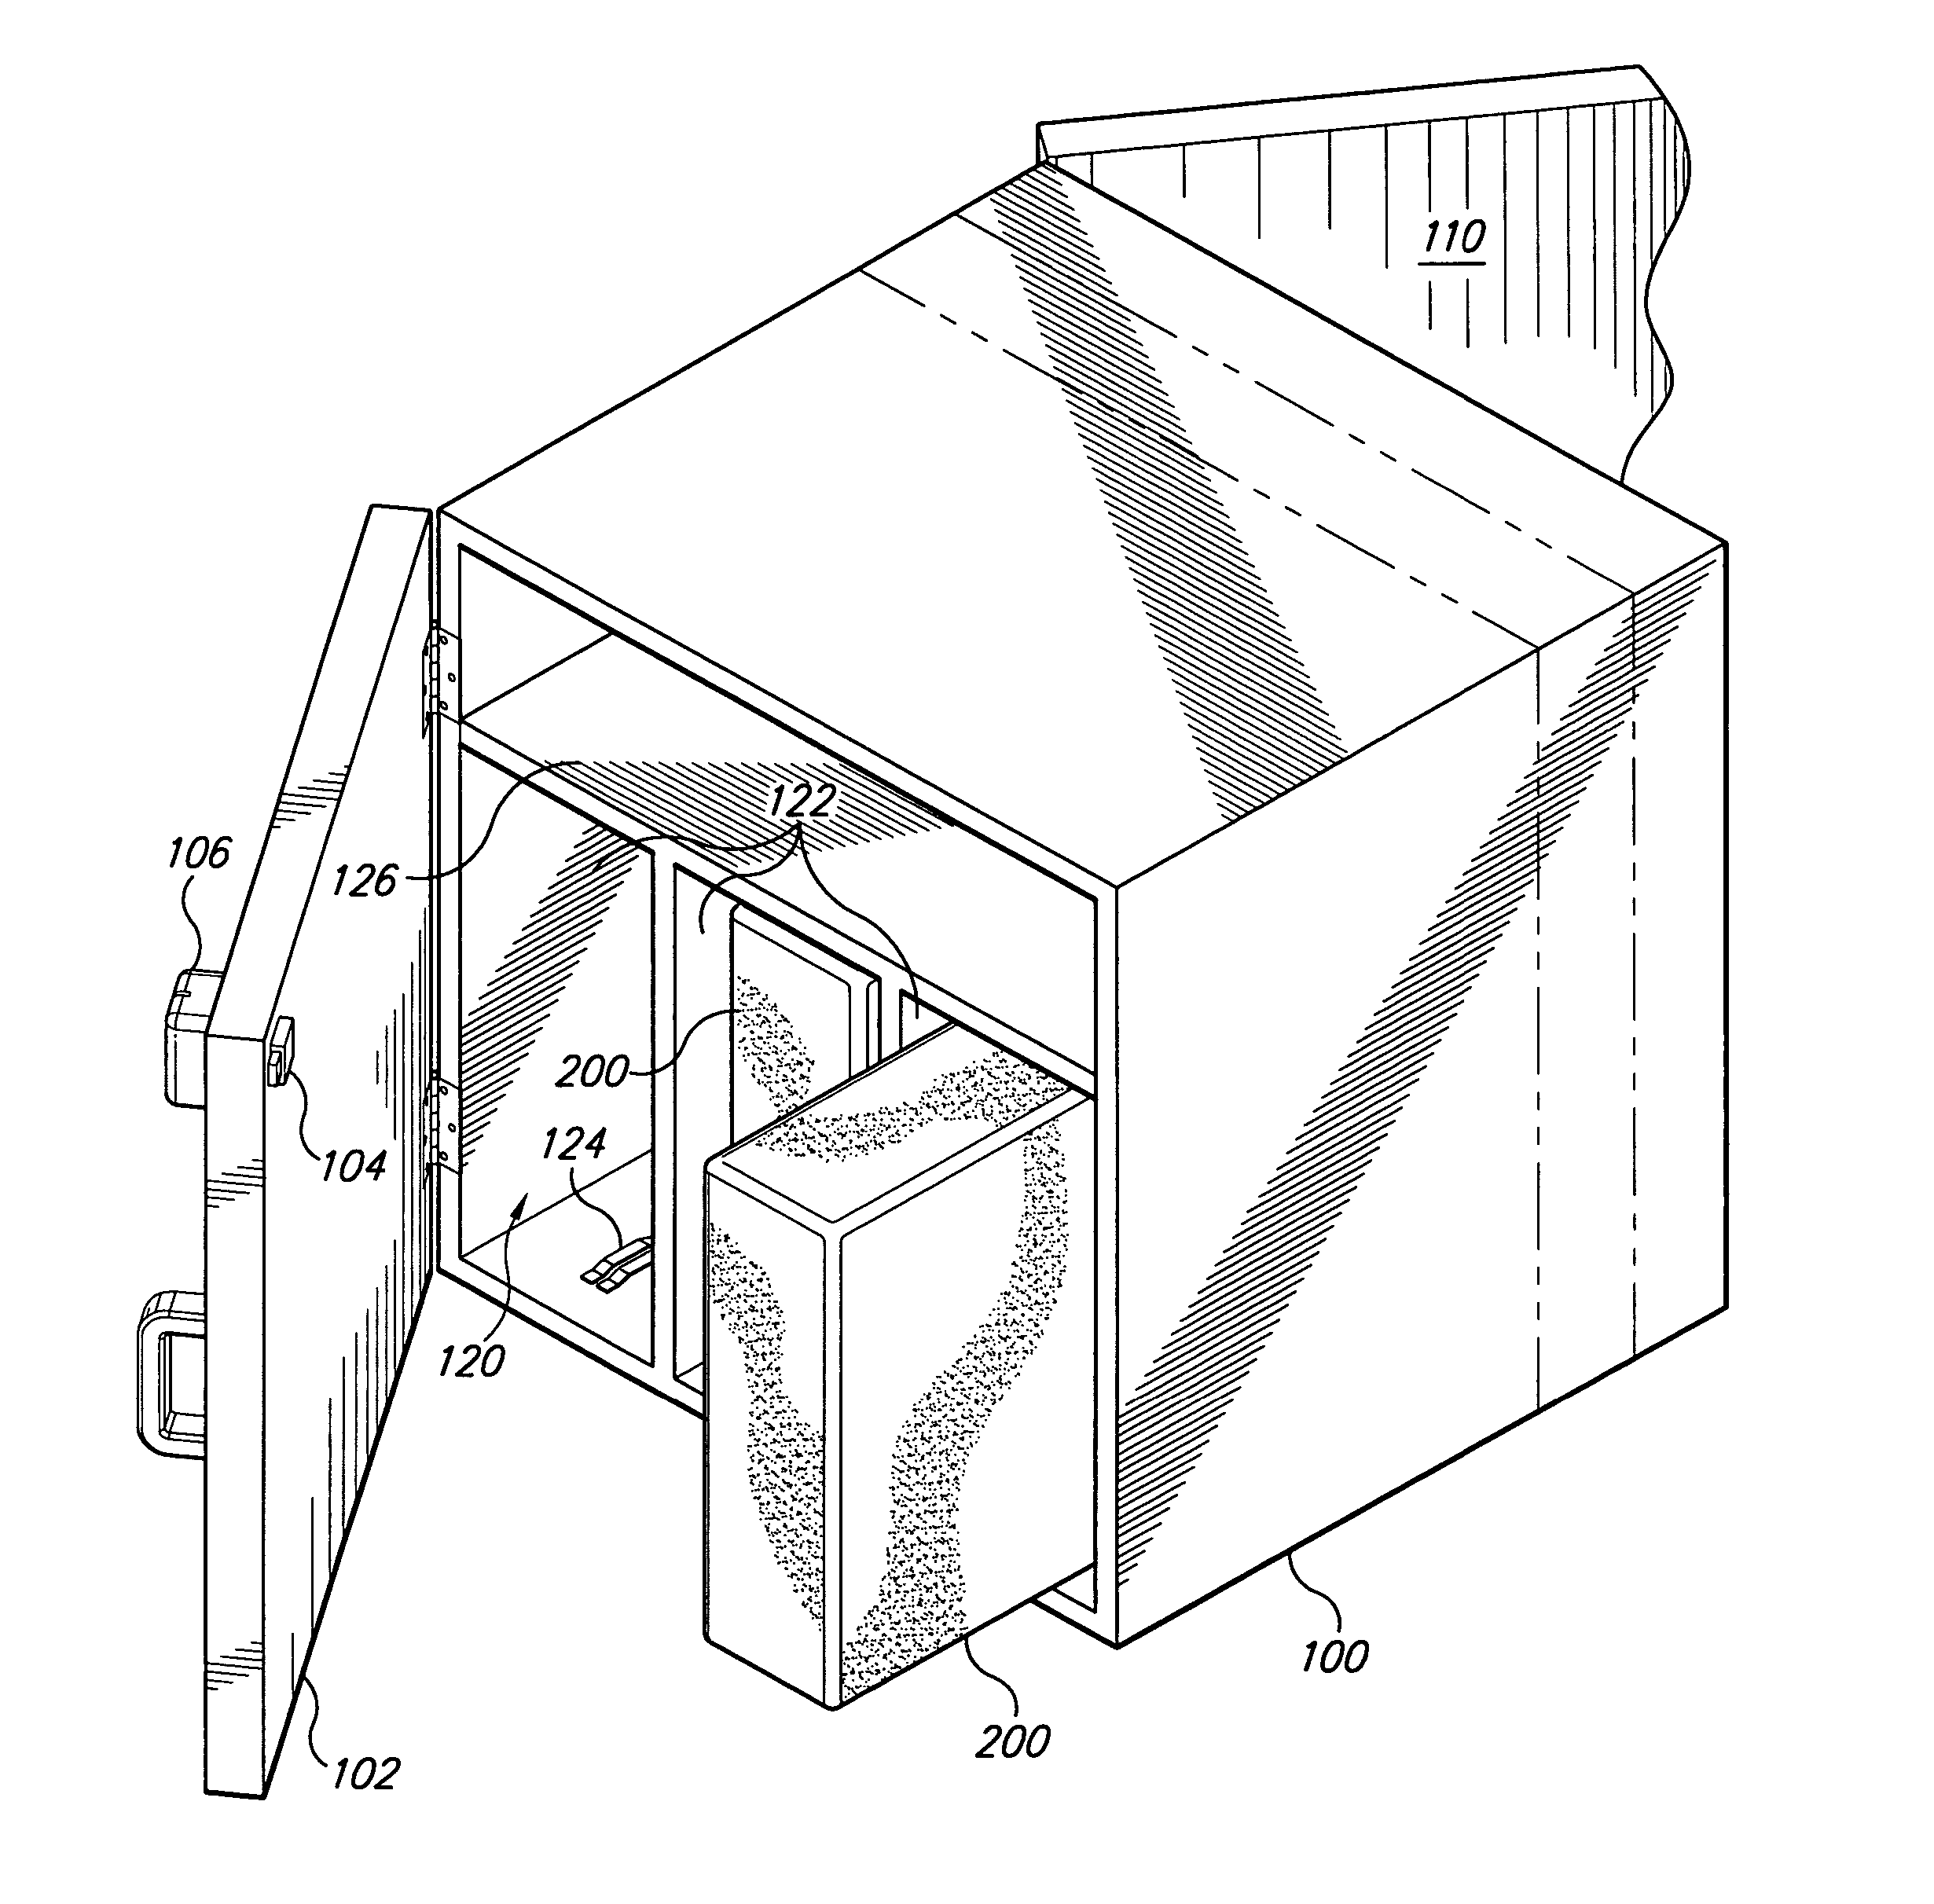 System and method for delivery of goods ordered via the internet